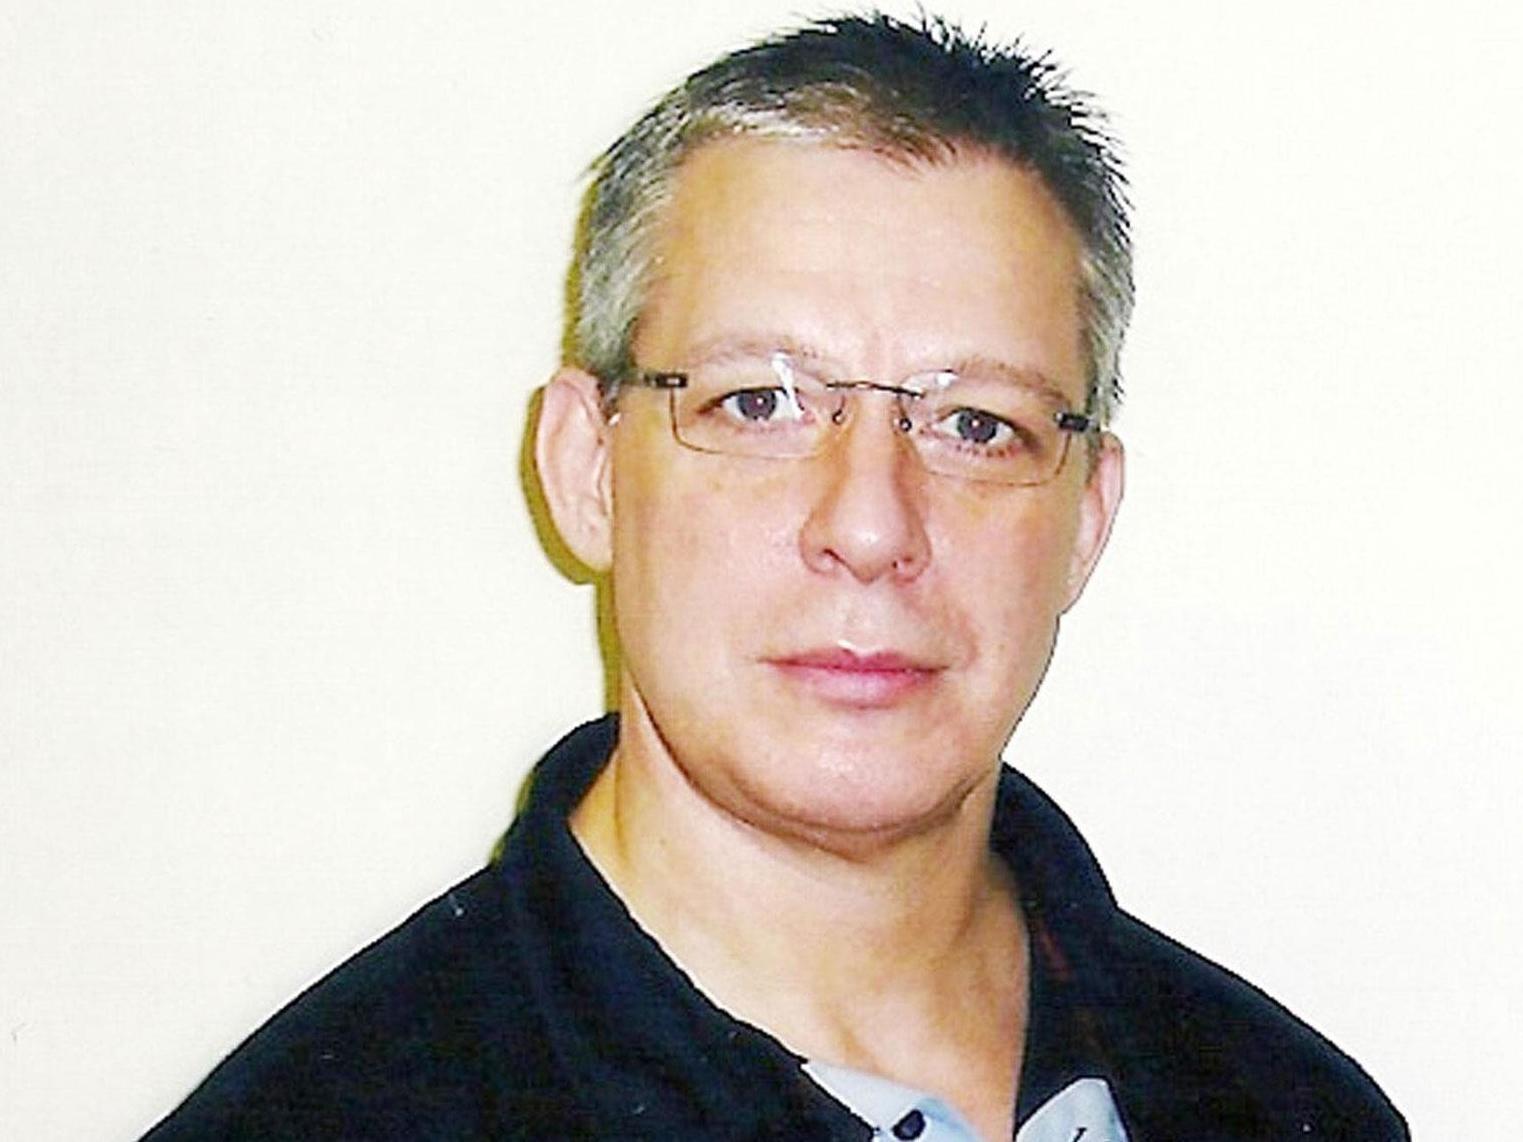 Jeremy Bamber, a convicted killer, was one of the prisoners who appealed against a whole-life sentence